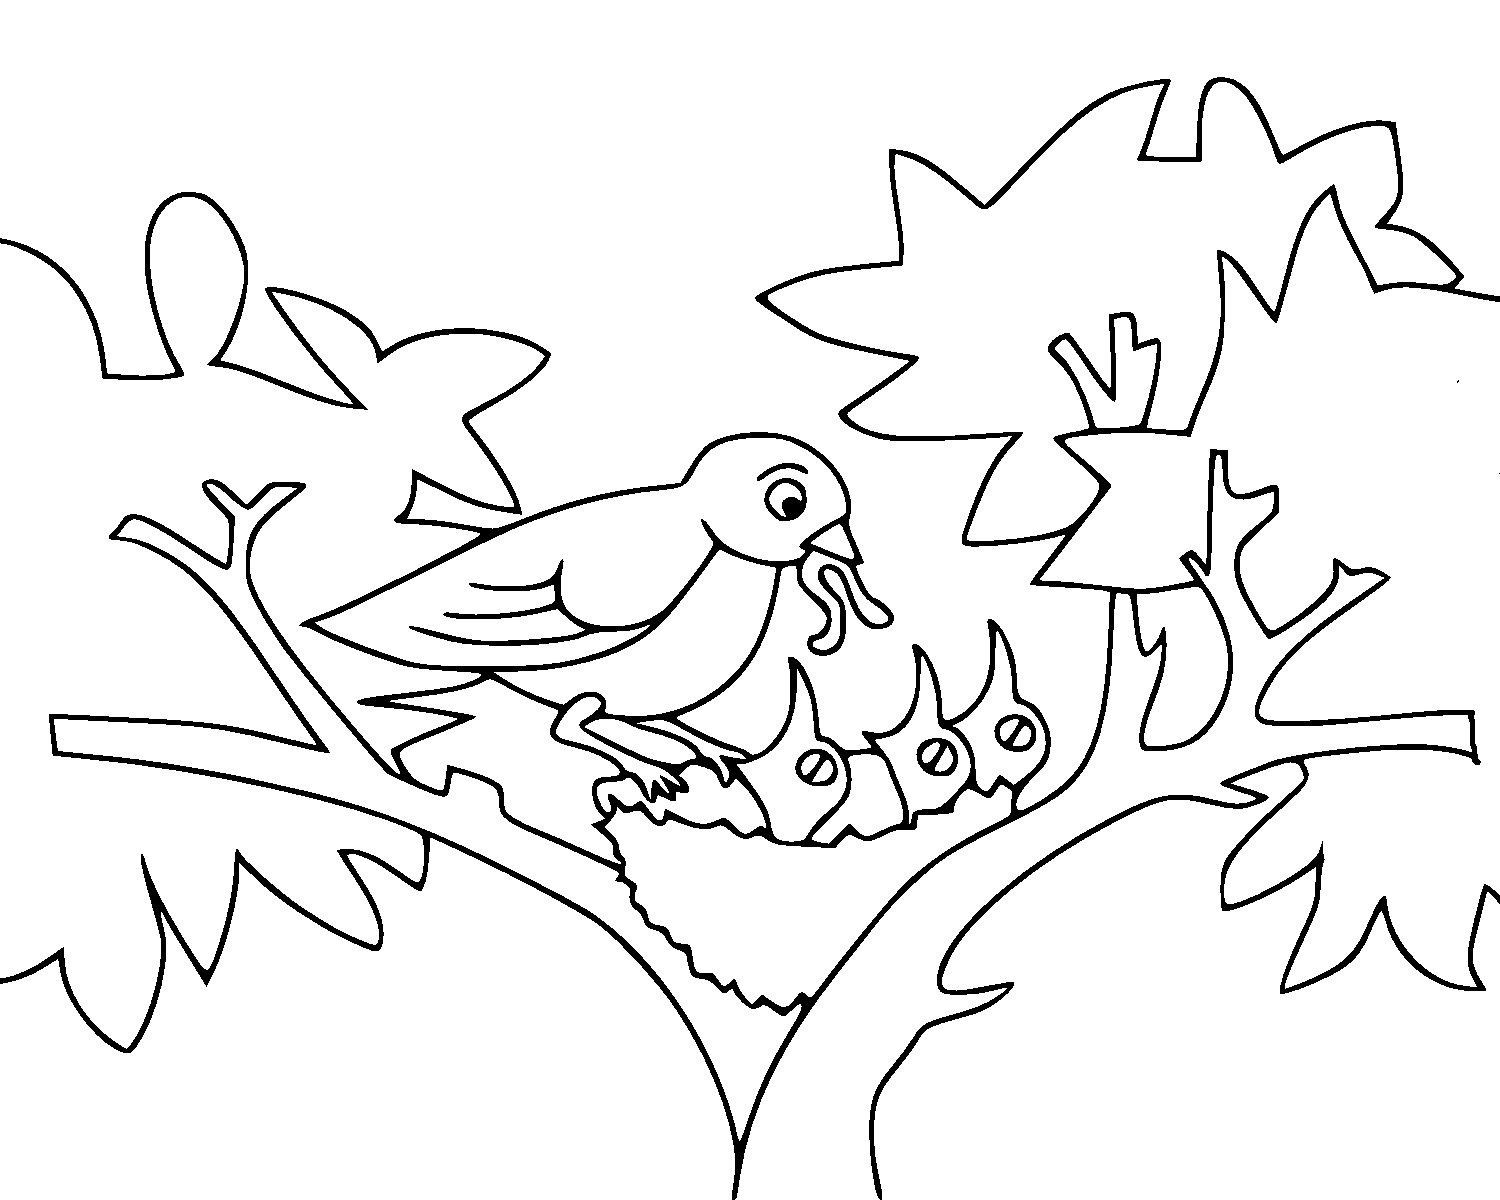 images of birds for coloring book pages - photo #8